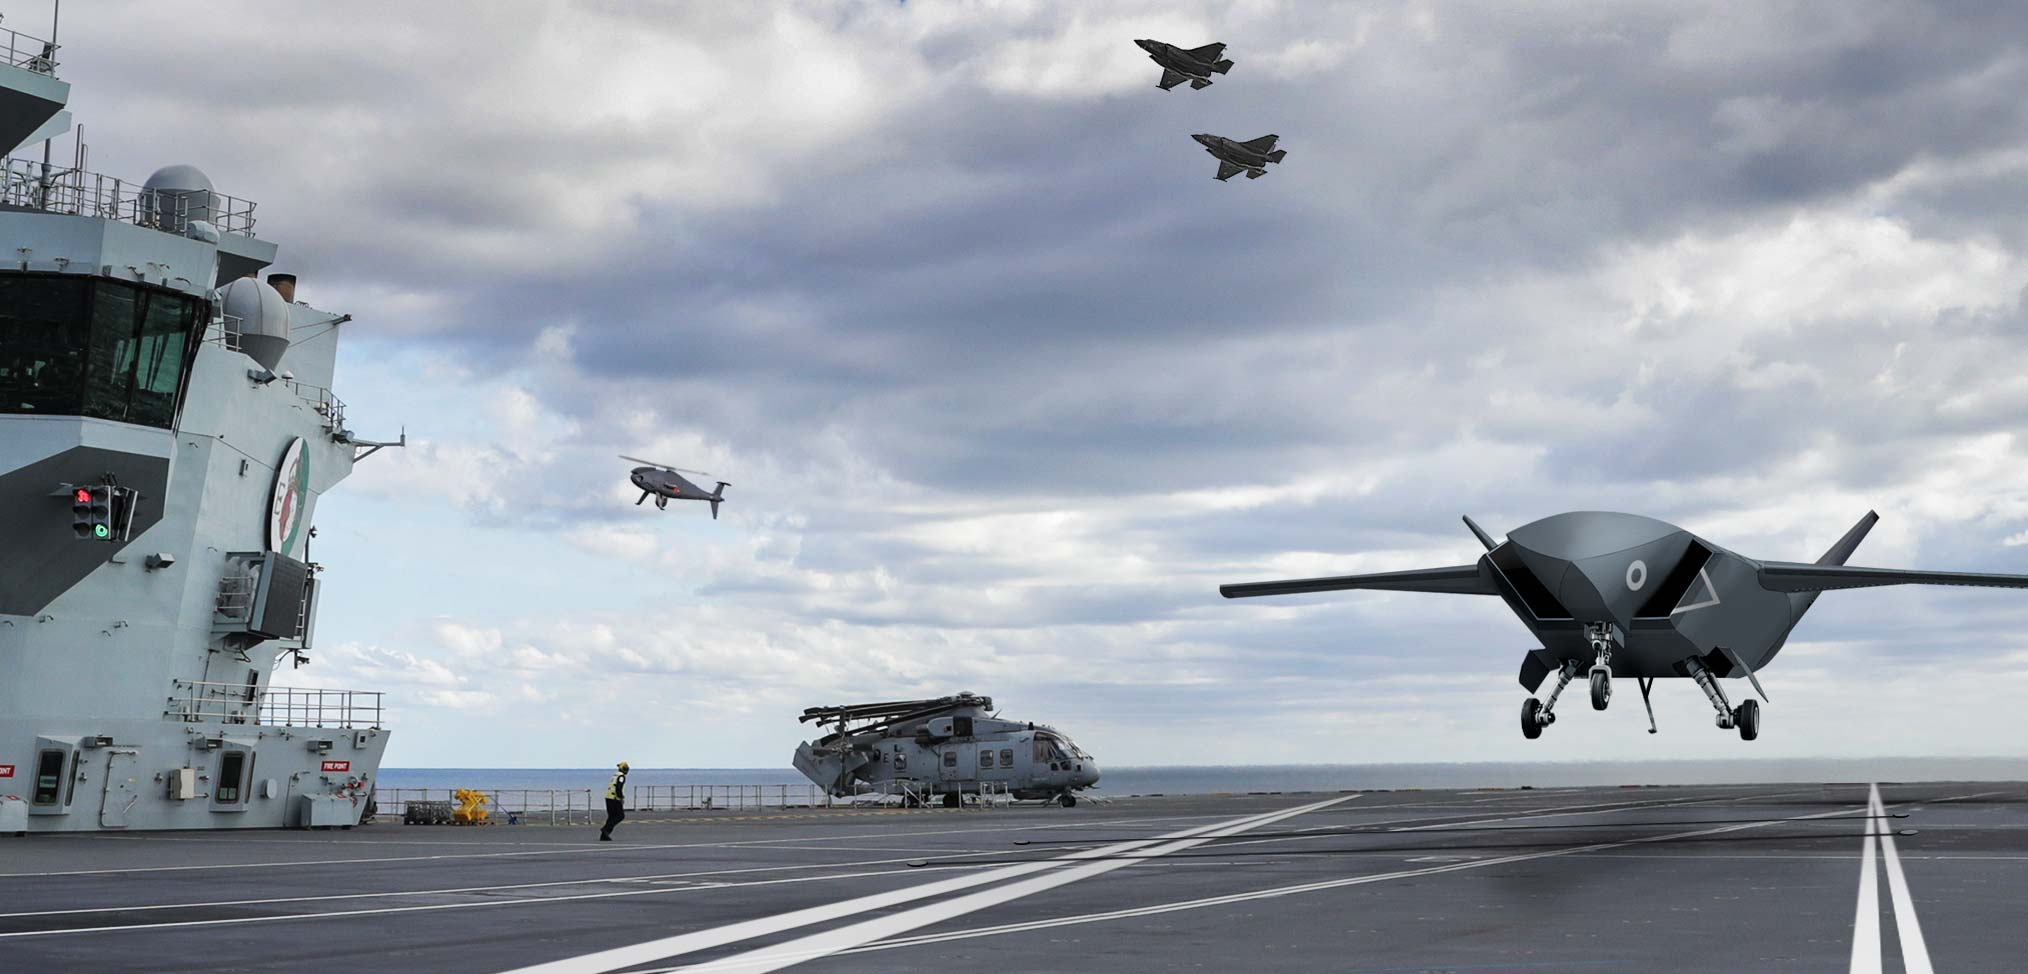 The Royal Navy has ambitious plans for its Future Maritime Aviation Force